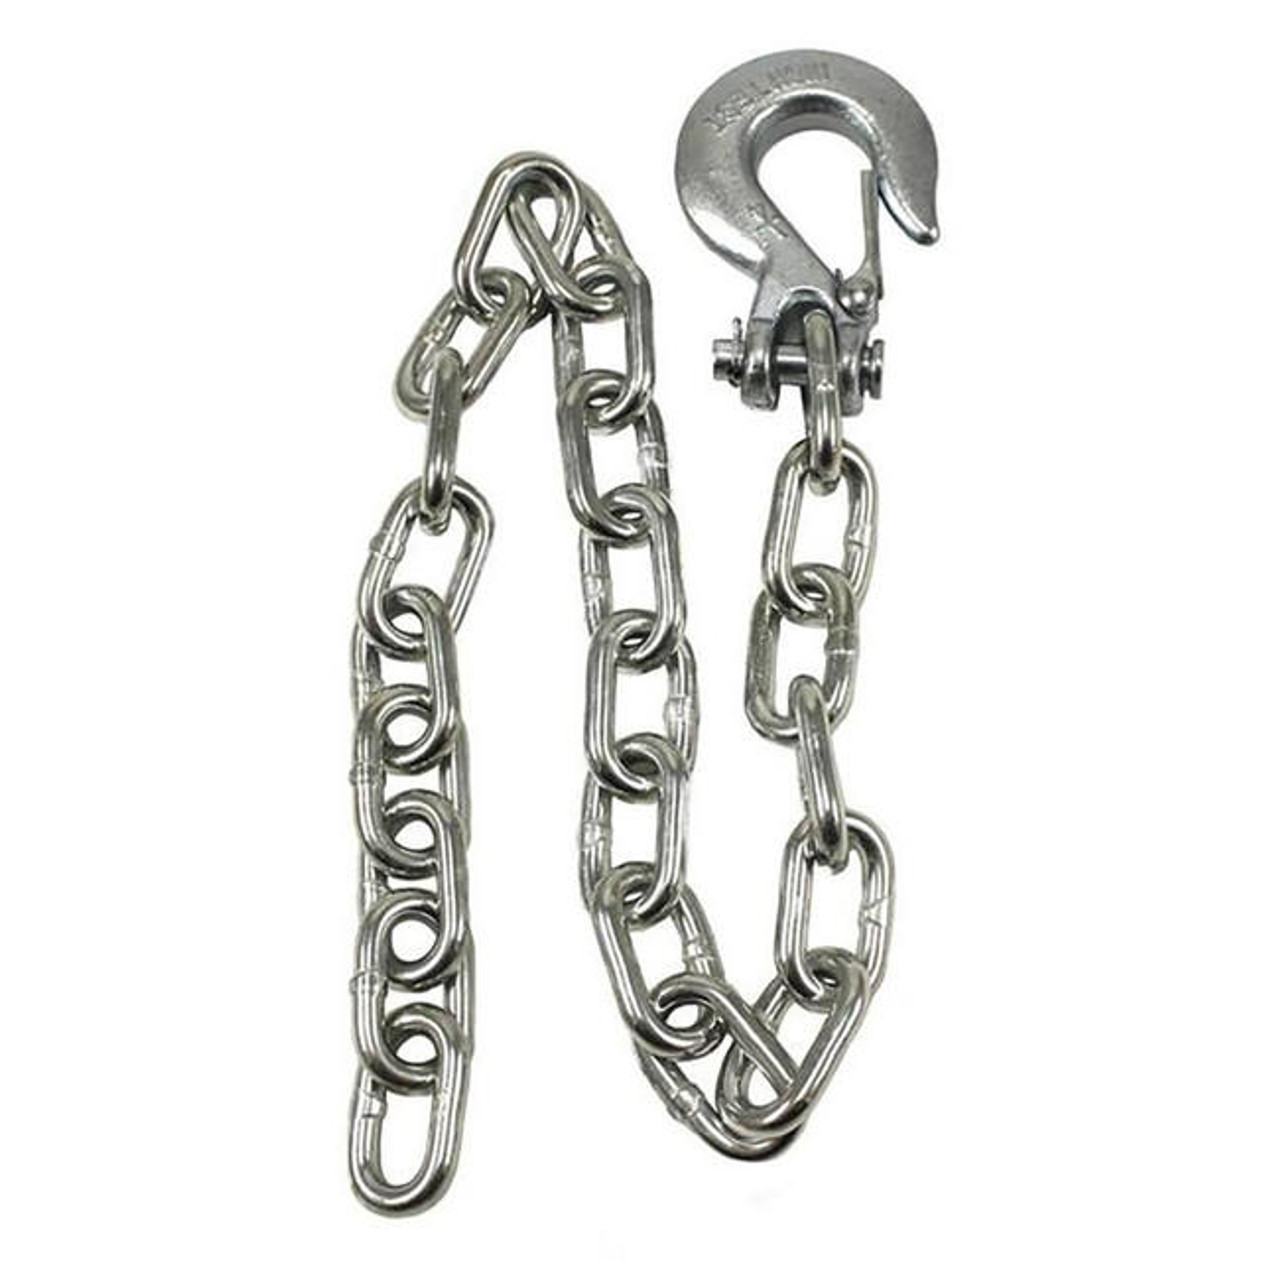 https://cdn11.bigcommerce.com/s-ohy7i05/images/stencil/1280x1280/products/505/28034/pacific-rim-14-x-30-trailer-safety-chain-7800-capacity__69253.1688590895.jpg?c=3